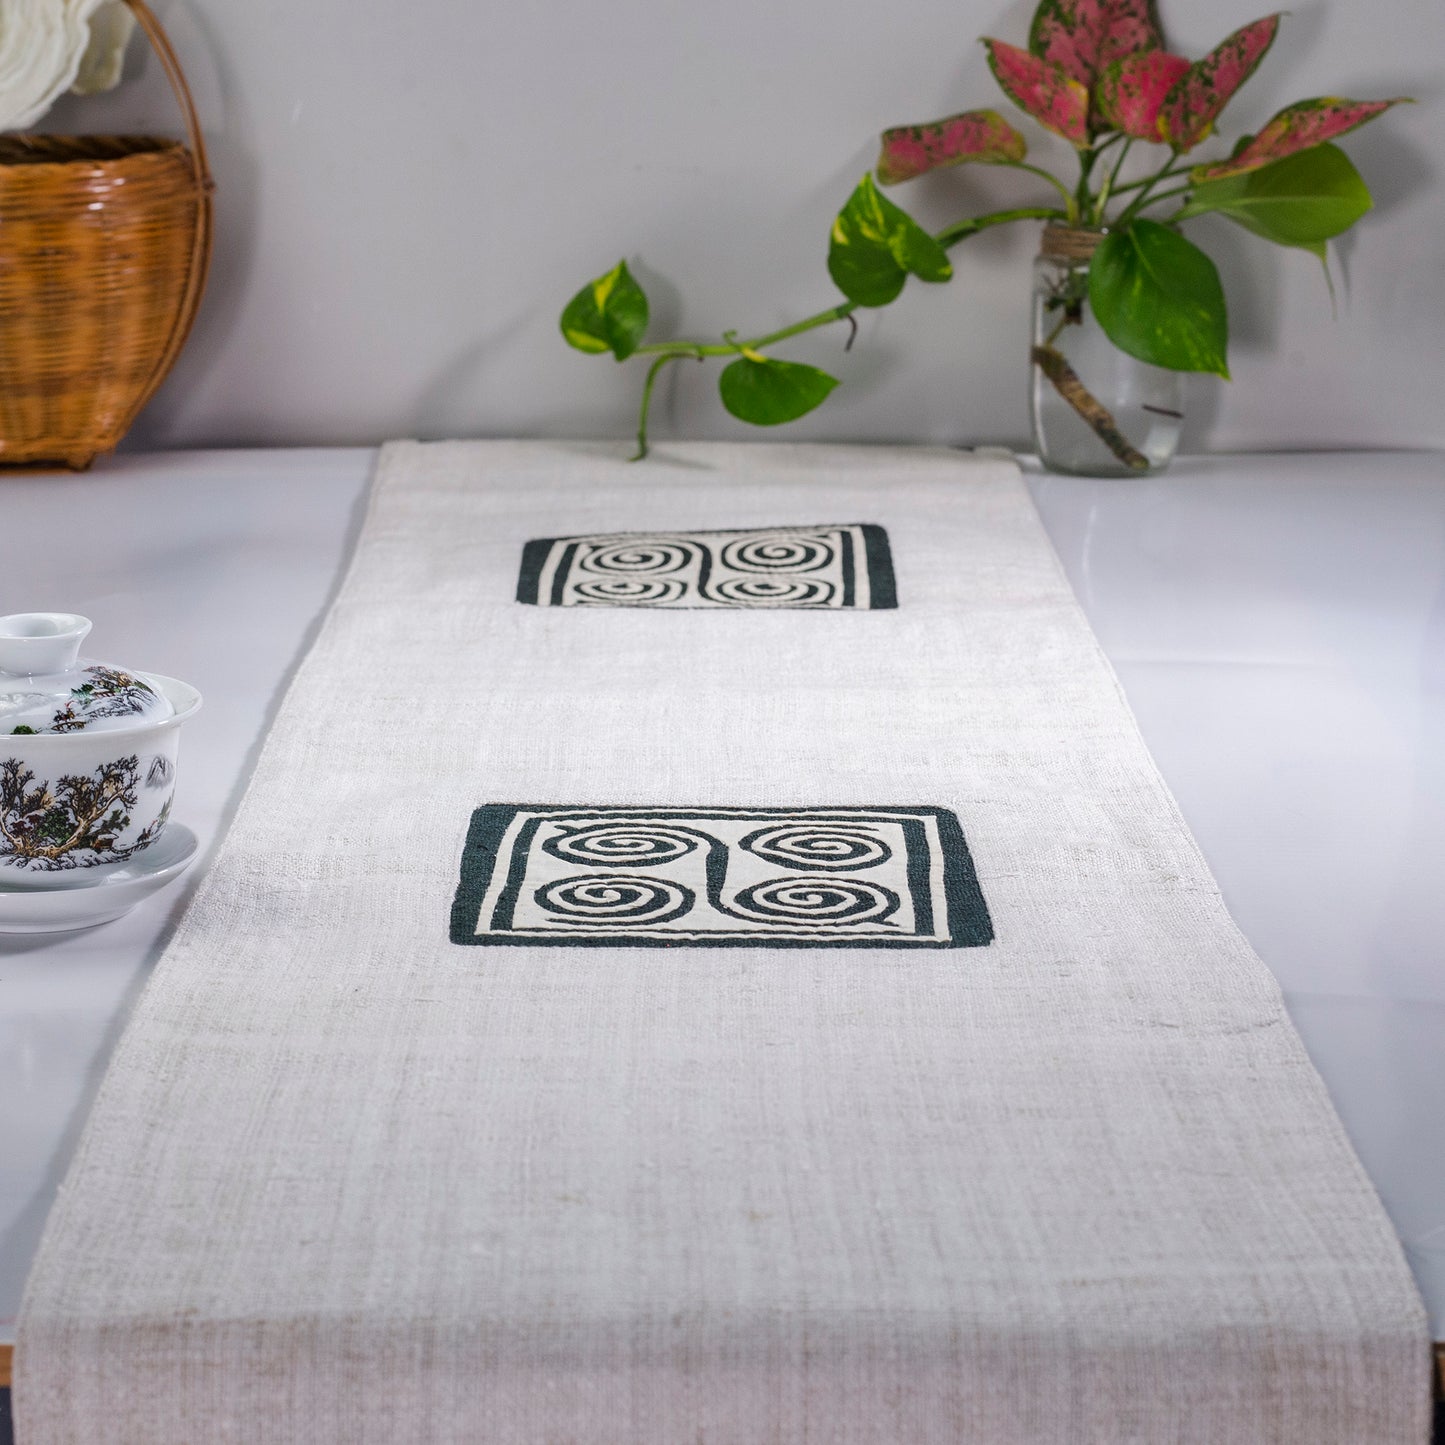 White Hemp Table Runner, unique patterns, hand-stitched details at both ends